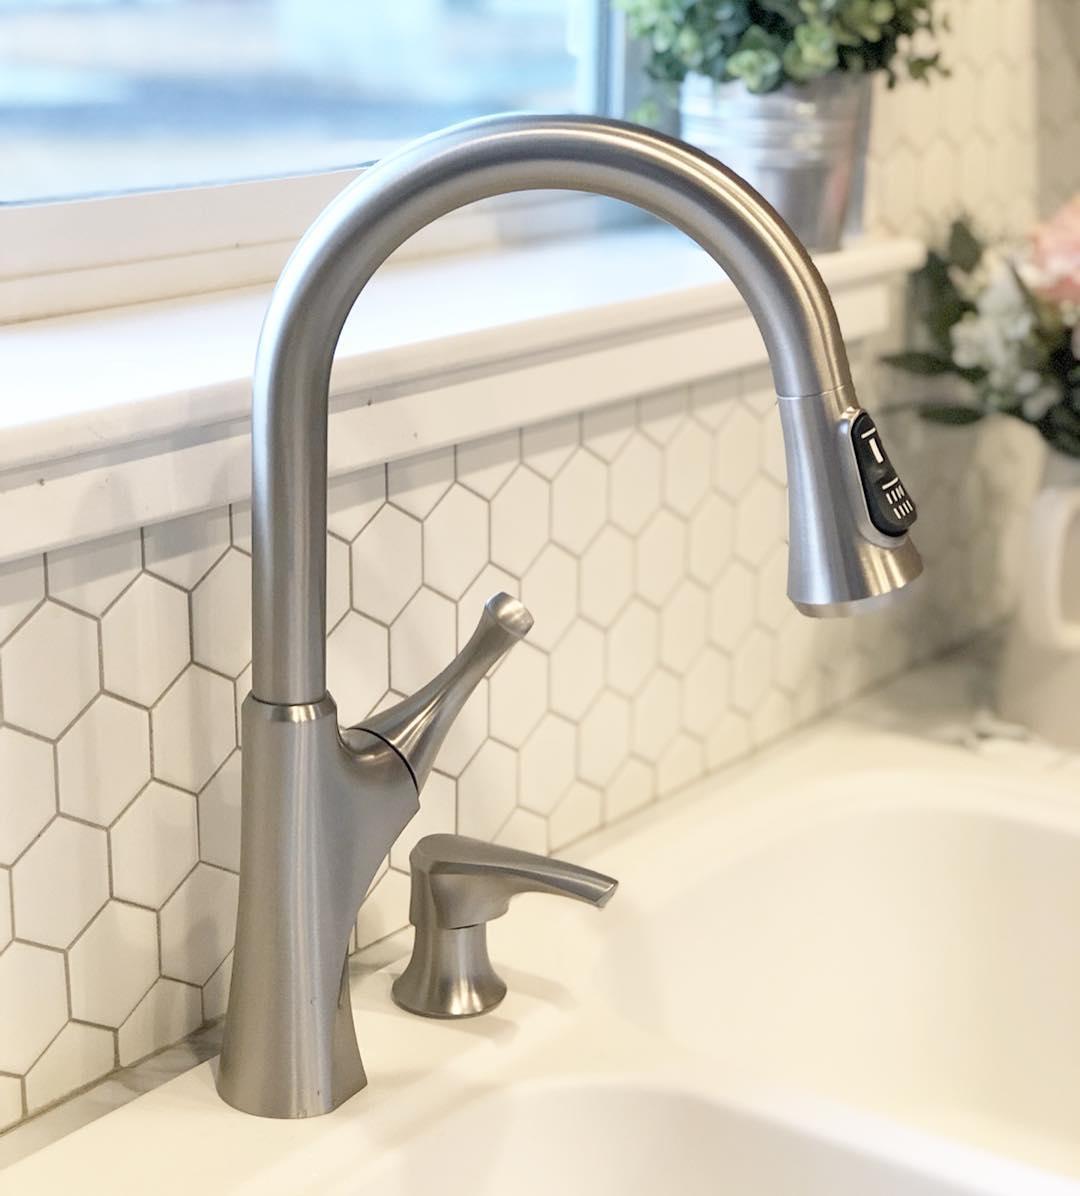 Pfister Faucets On Twitter Natalie Thecreativemom Installed